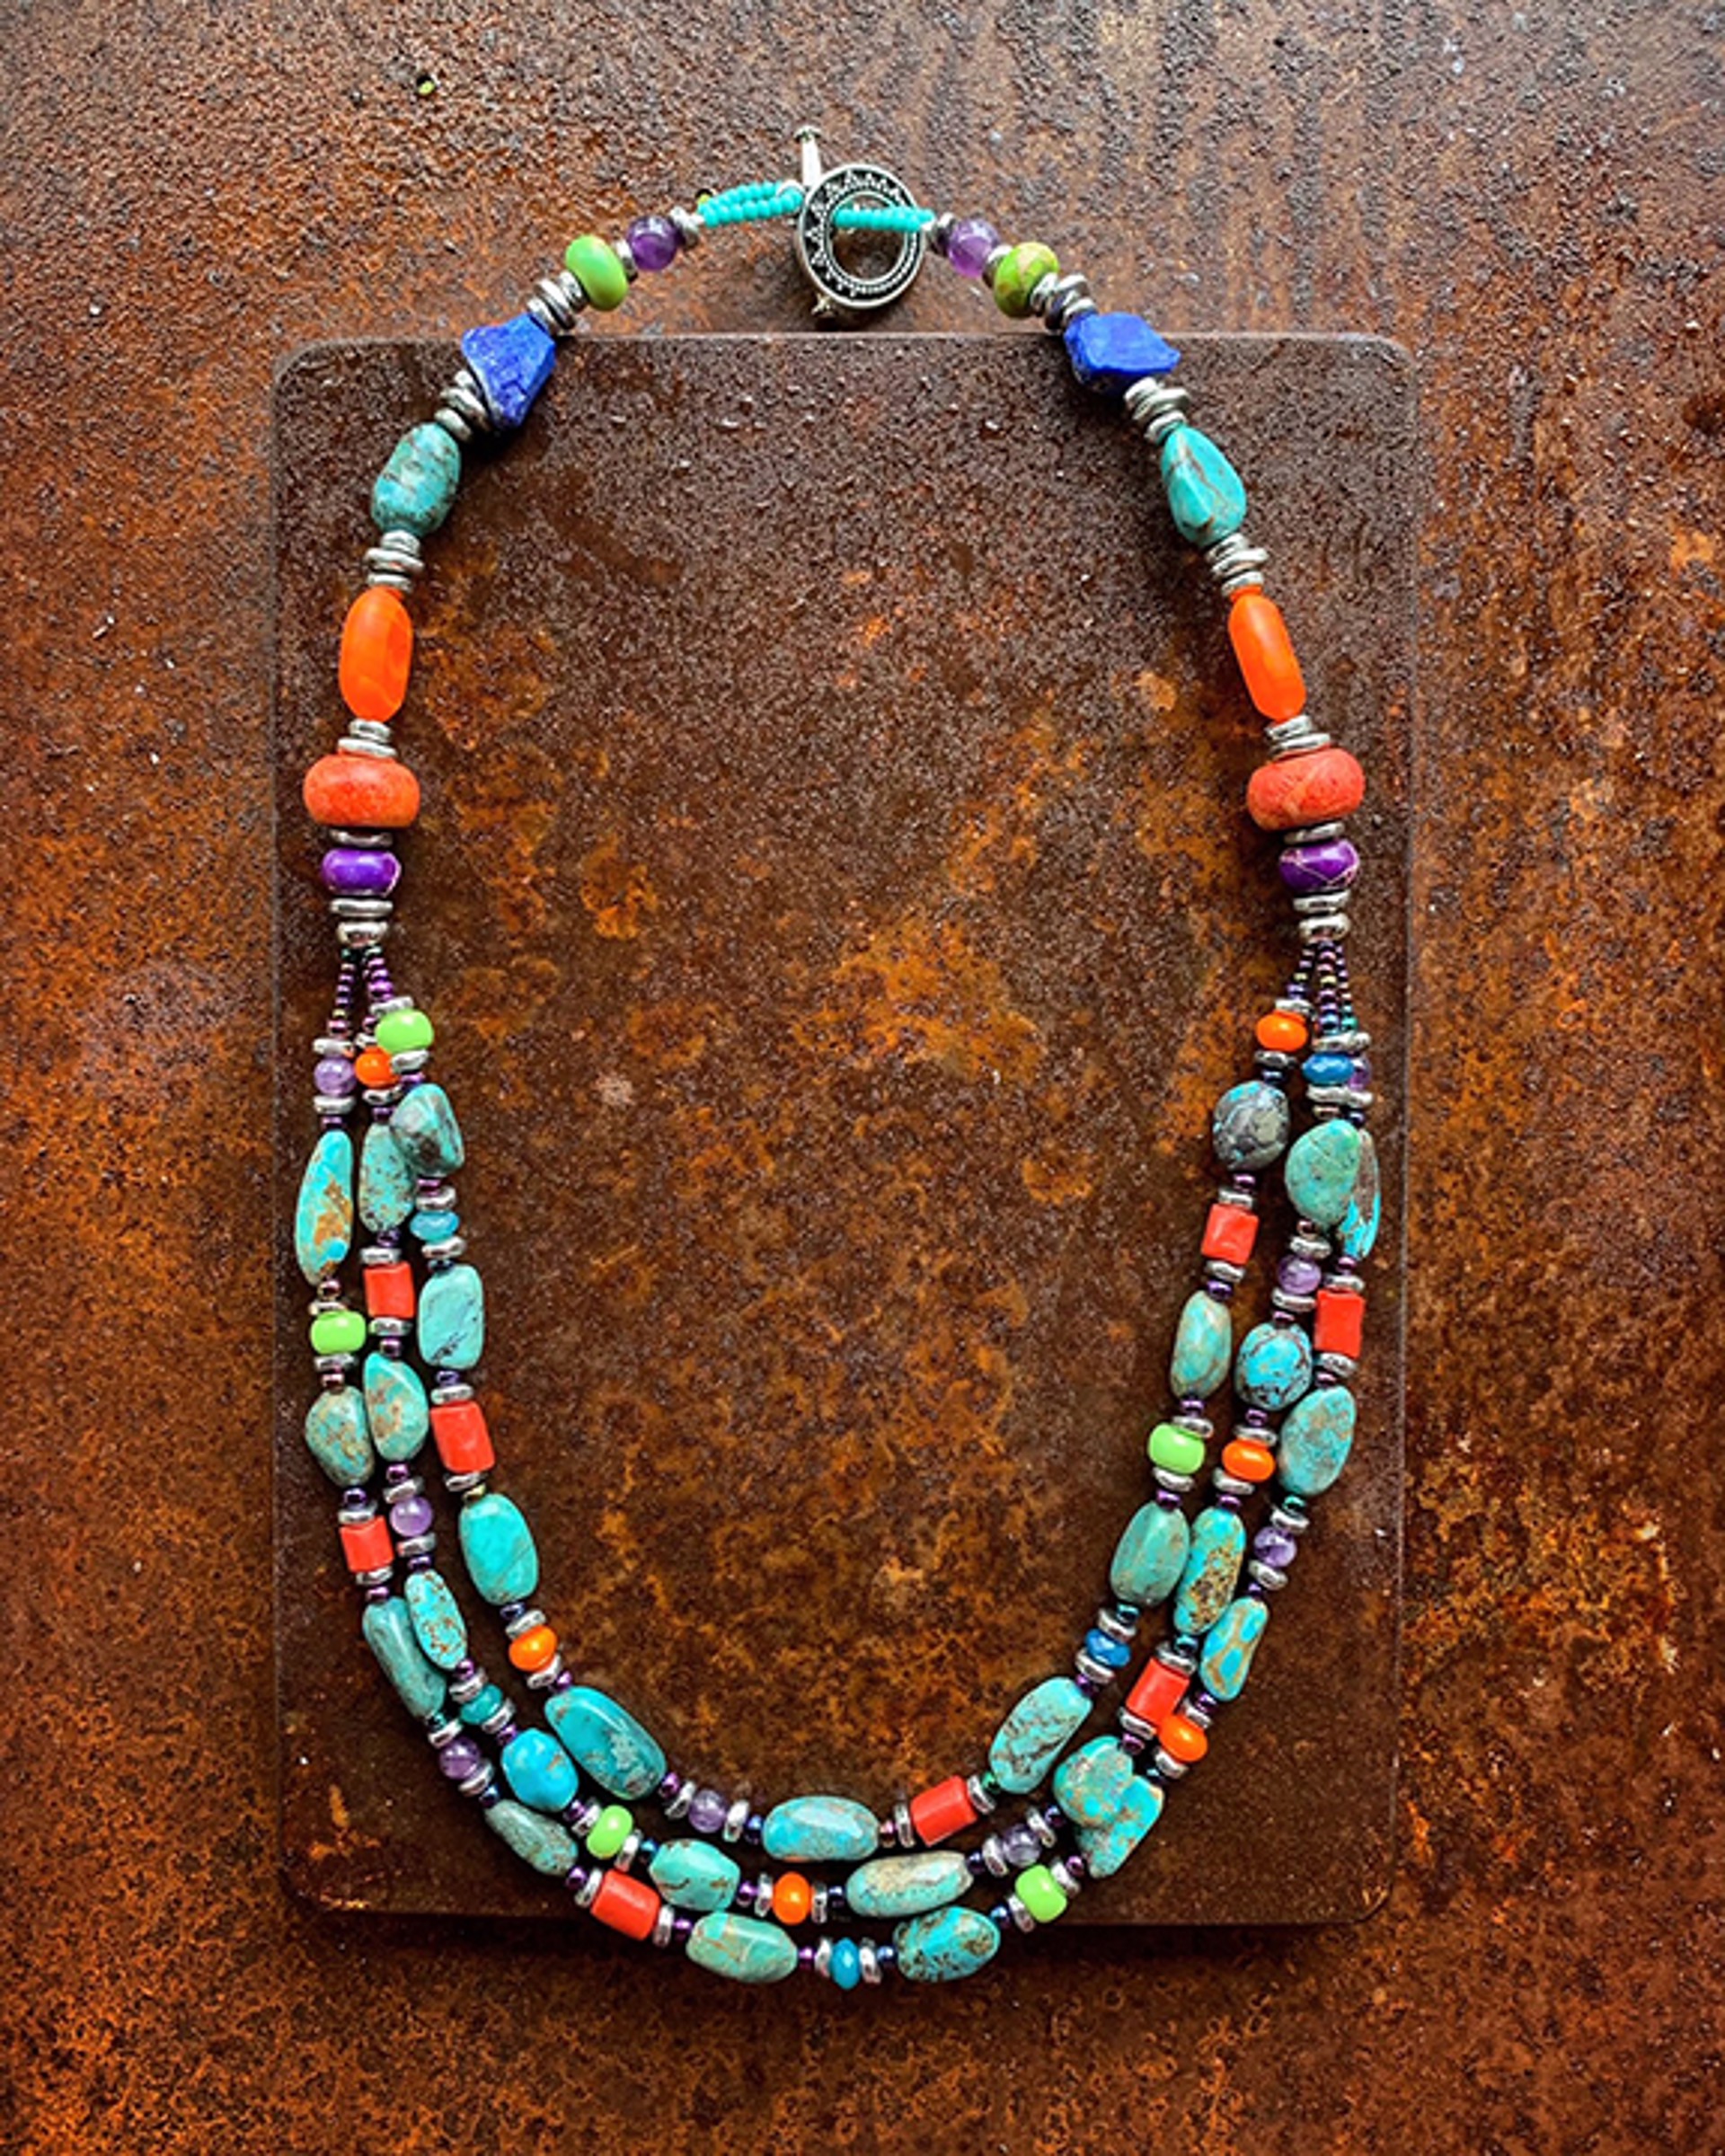 K737 Triple Strand Turquoise Necklace with Orange Accents by Kelly Ormsby